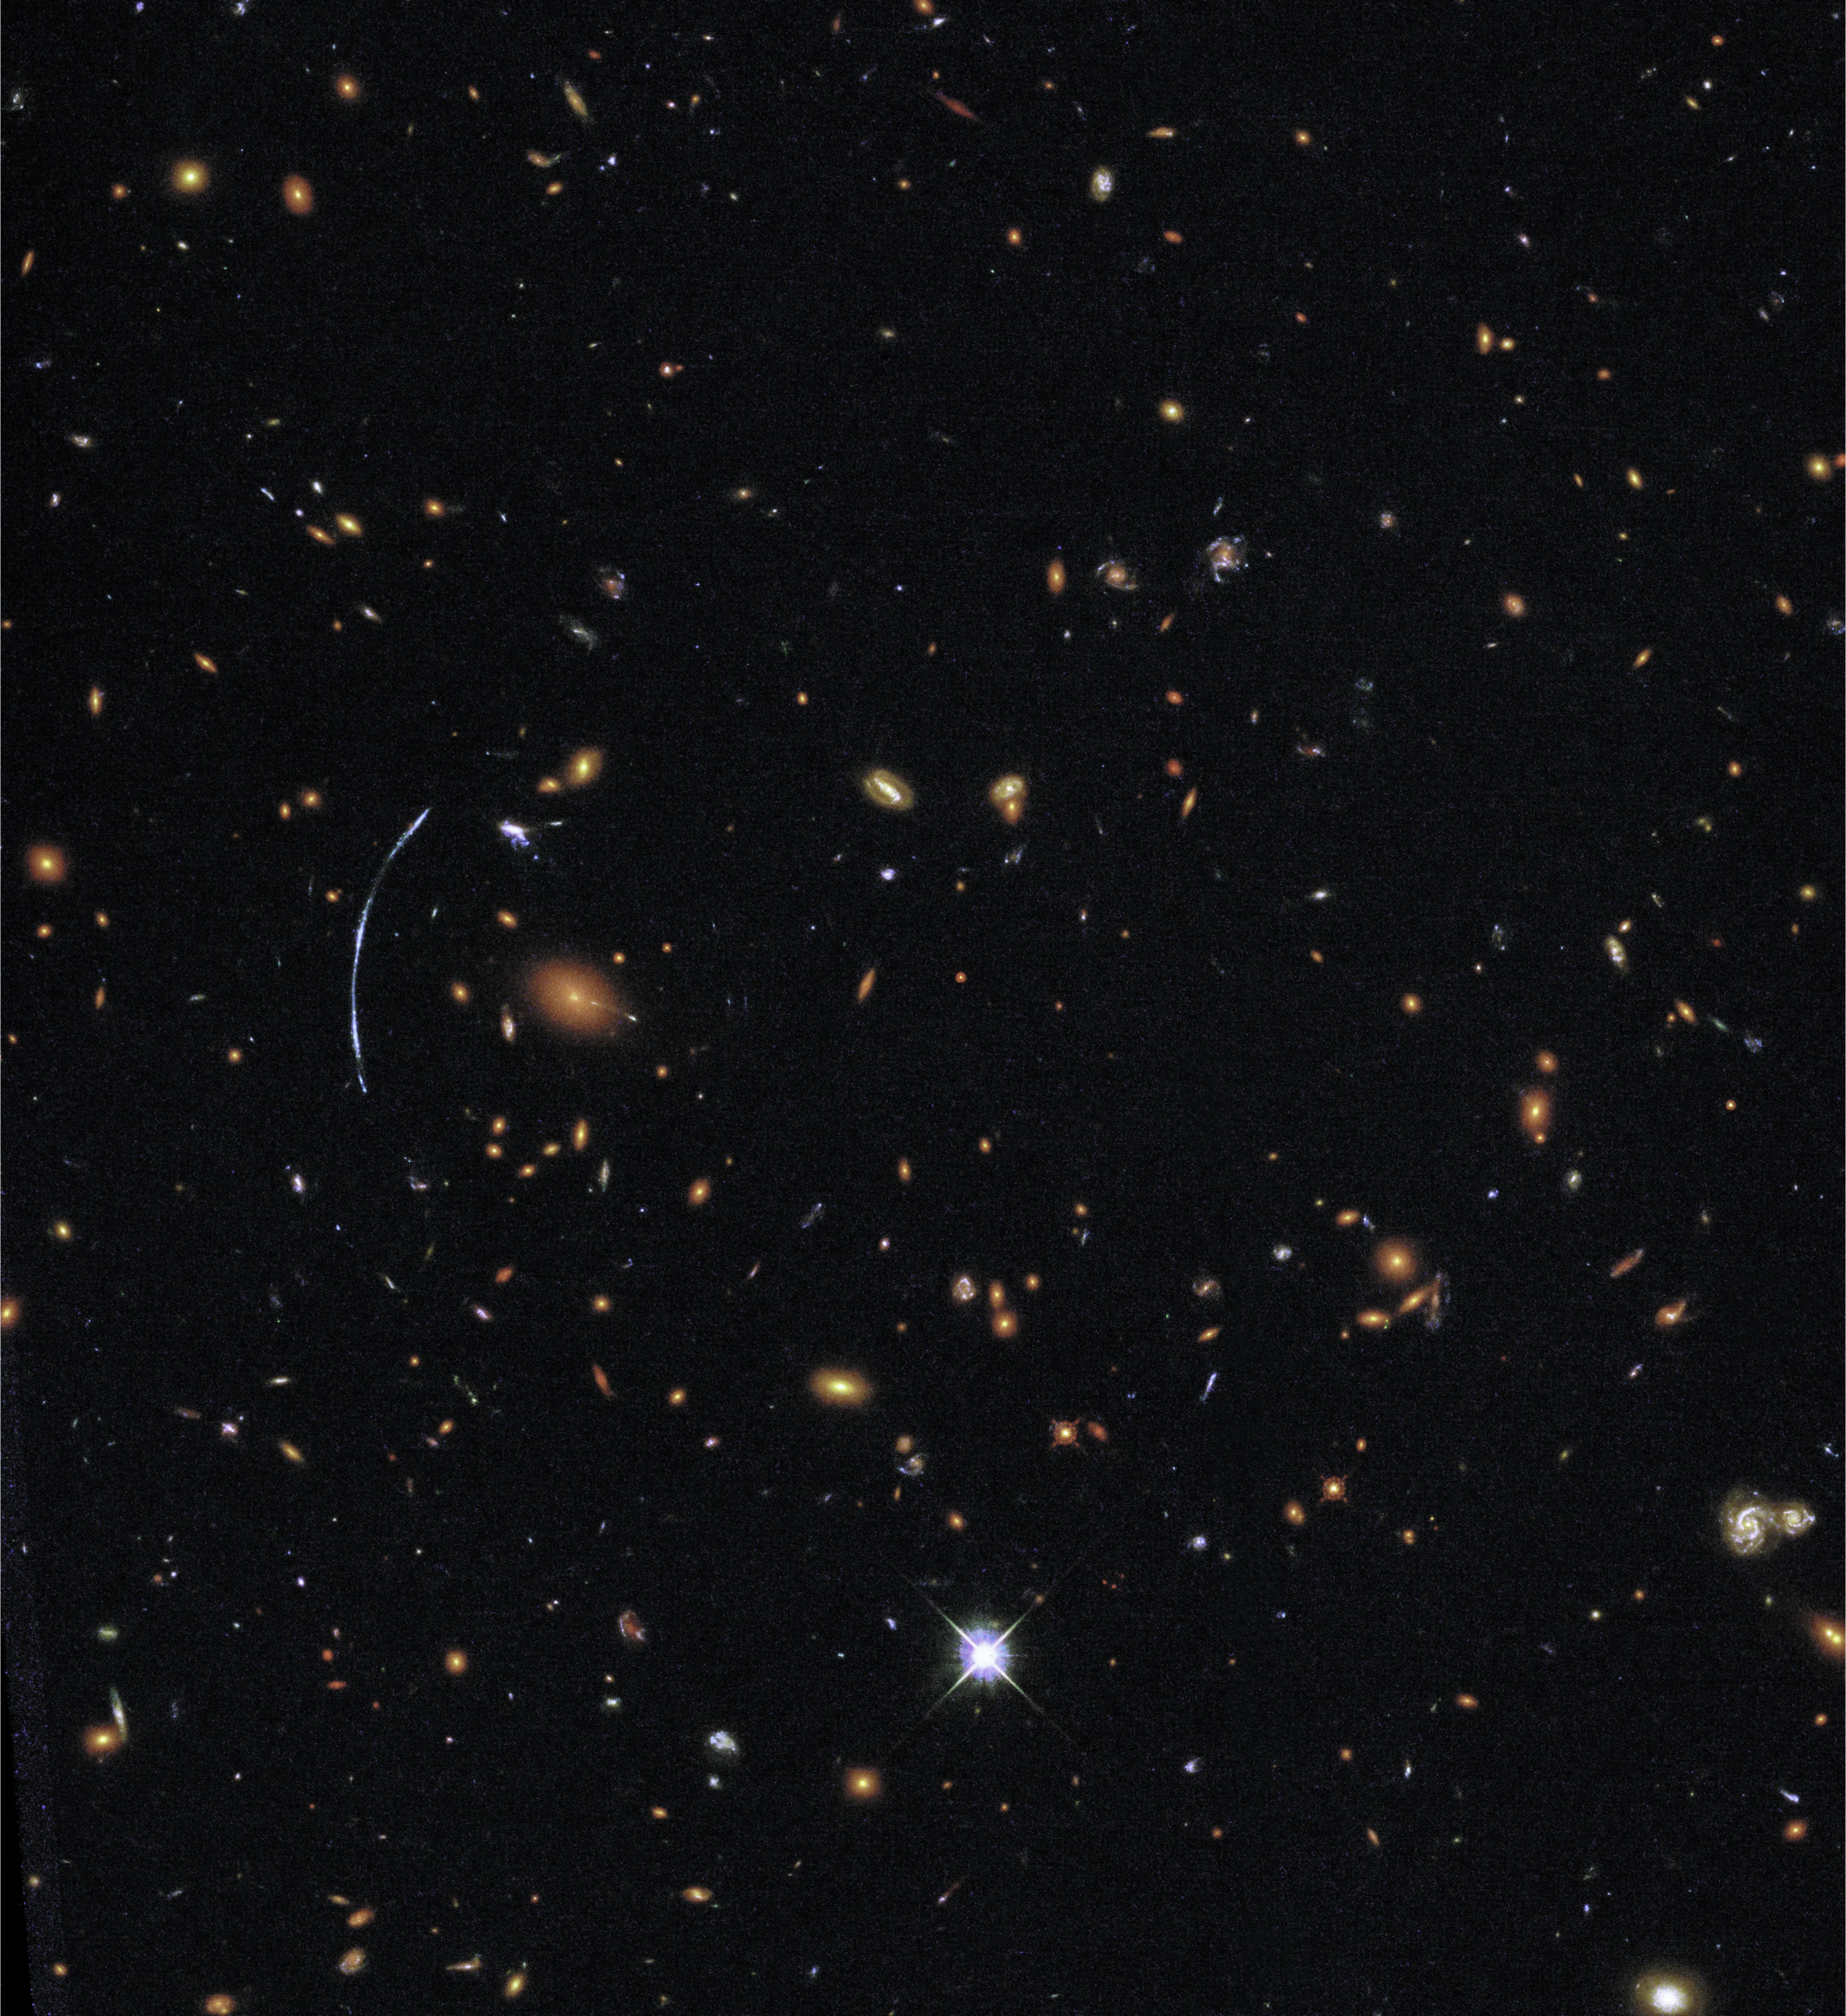 hubble image showing a lensed galaxy among many